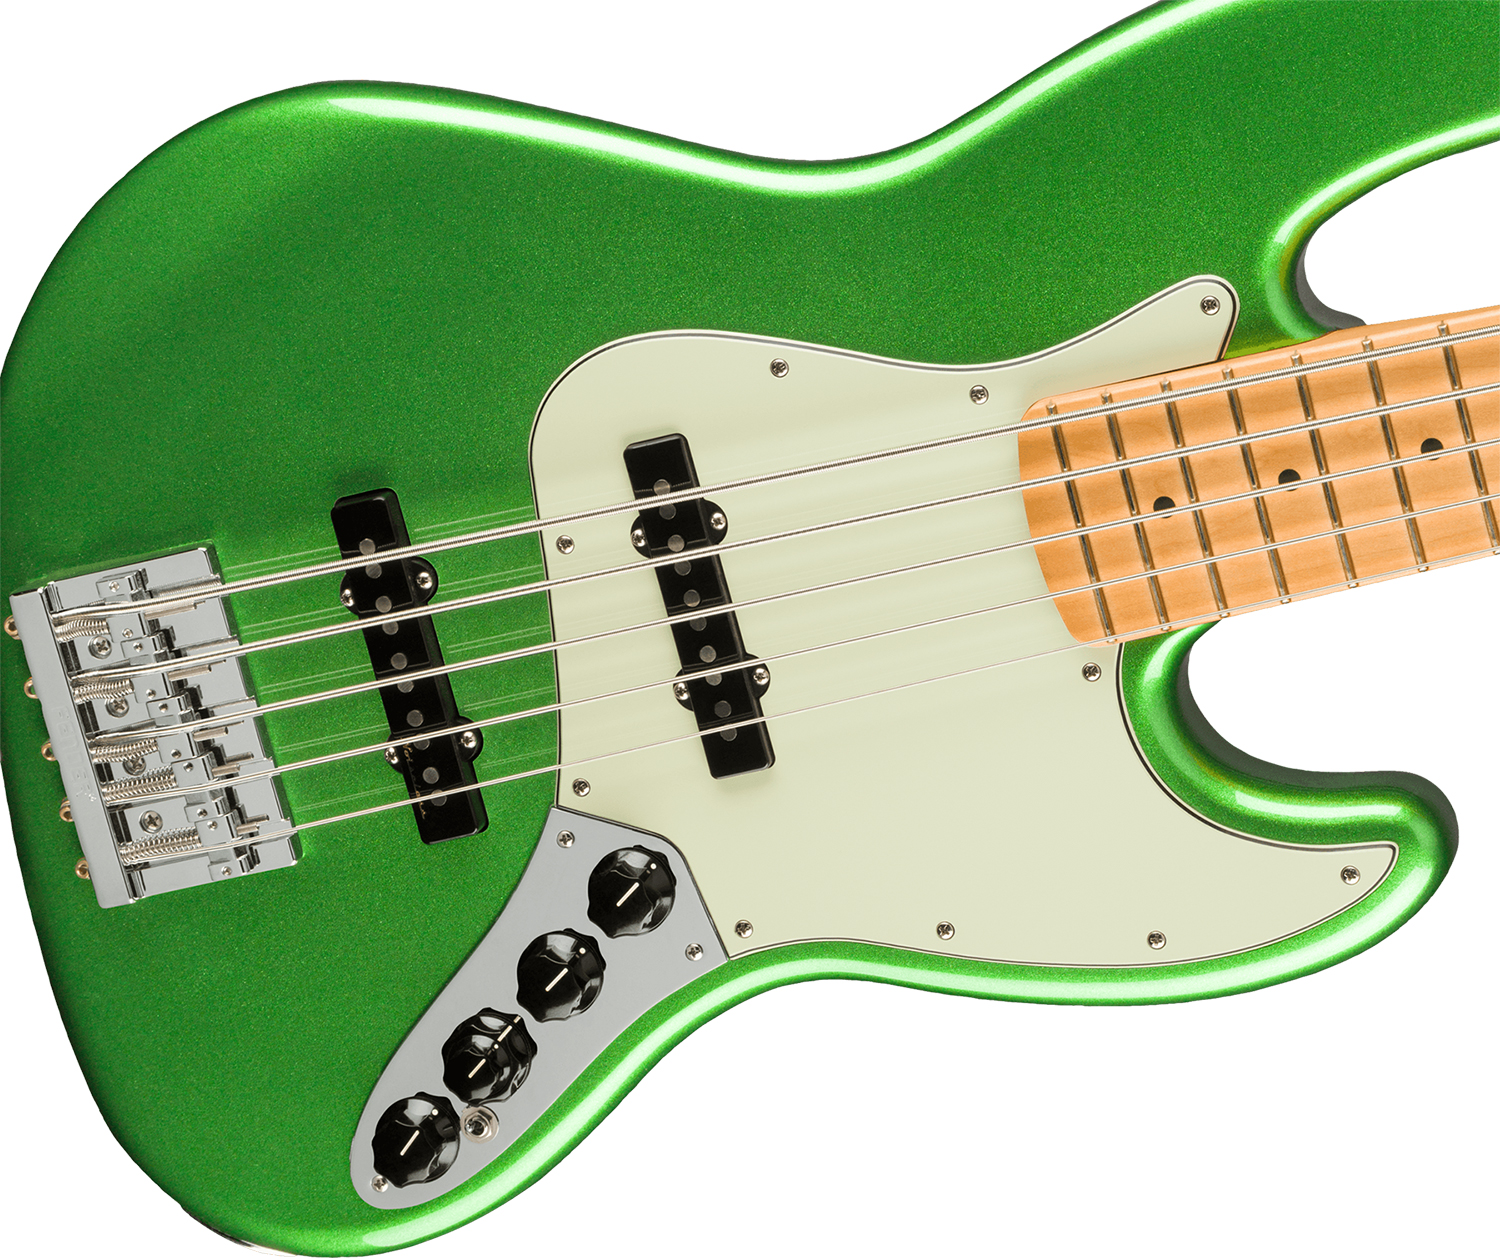 Fender Jazz Bass Player Plus V Mex 5c Active Mn - Cosmic Jade - Solid body electric bass - Variation 2